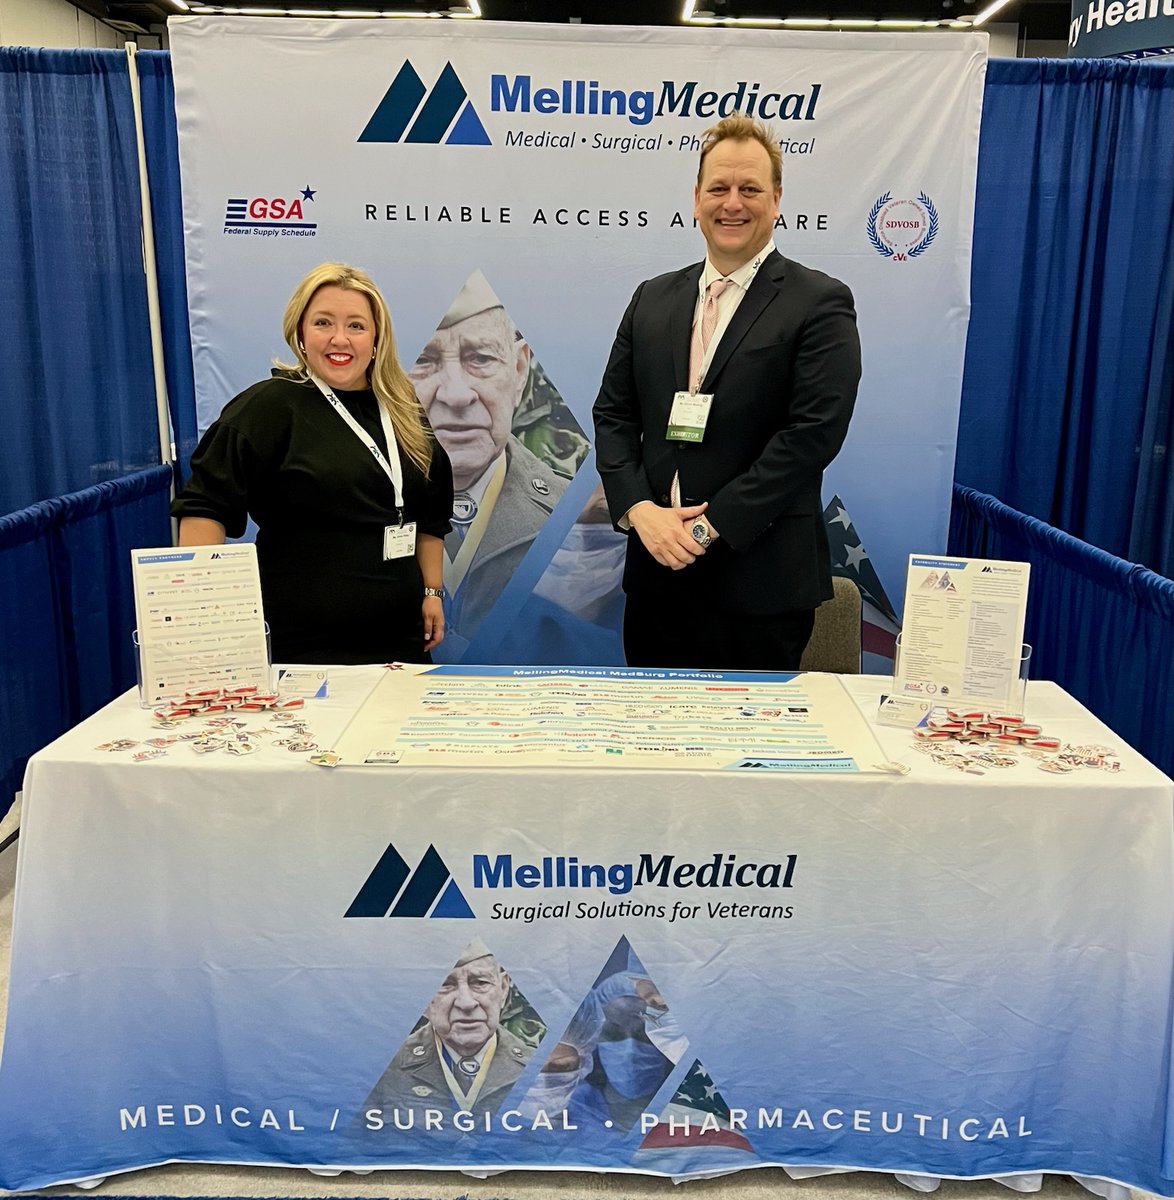 The @MellingMedical team is on the ground at the #MHSConference, standing by at booth 7⃣0⃣5⃣, ready to to answer your questions about #MilitaryHealth and contracting in the federal health care system. #SDVOSB #VeteransCare #FoundedInService mellingmedical.com